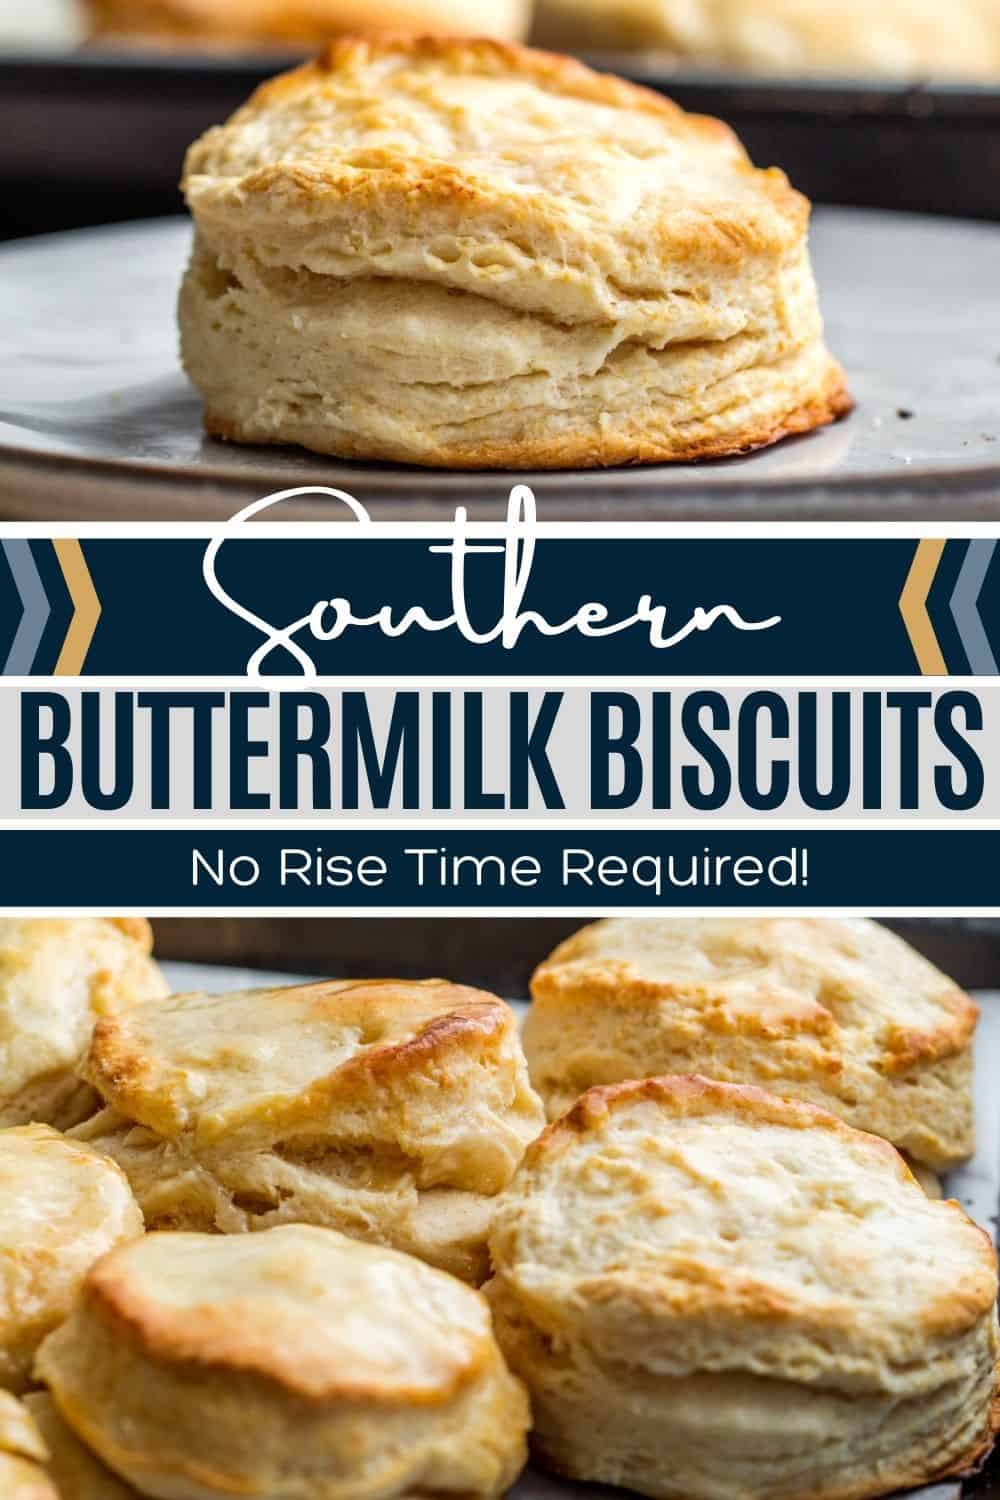 Classic Southern Buttermilk Biscuits Recipe - Erhardts Eat